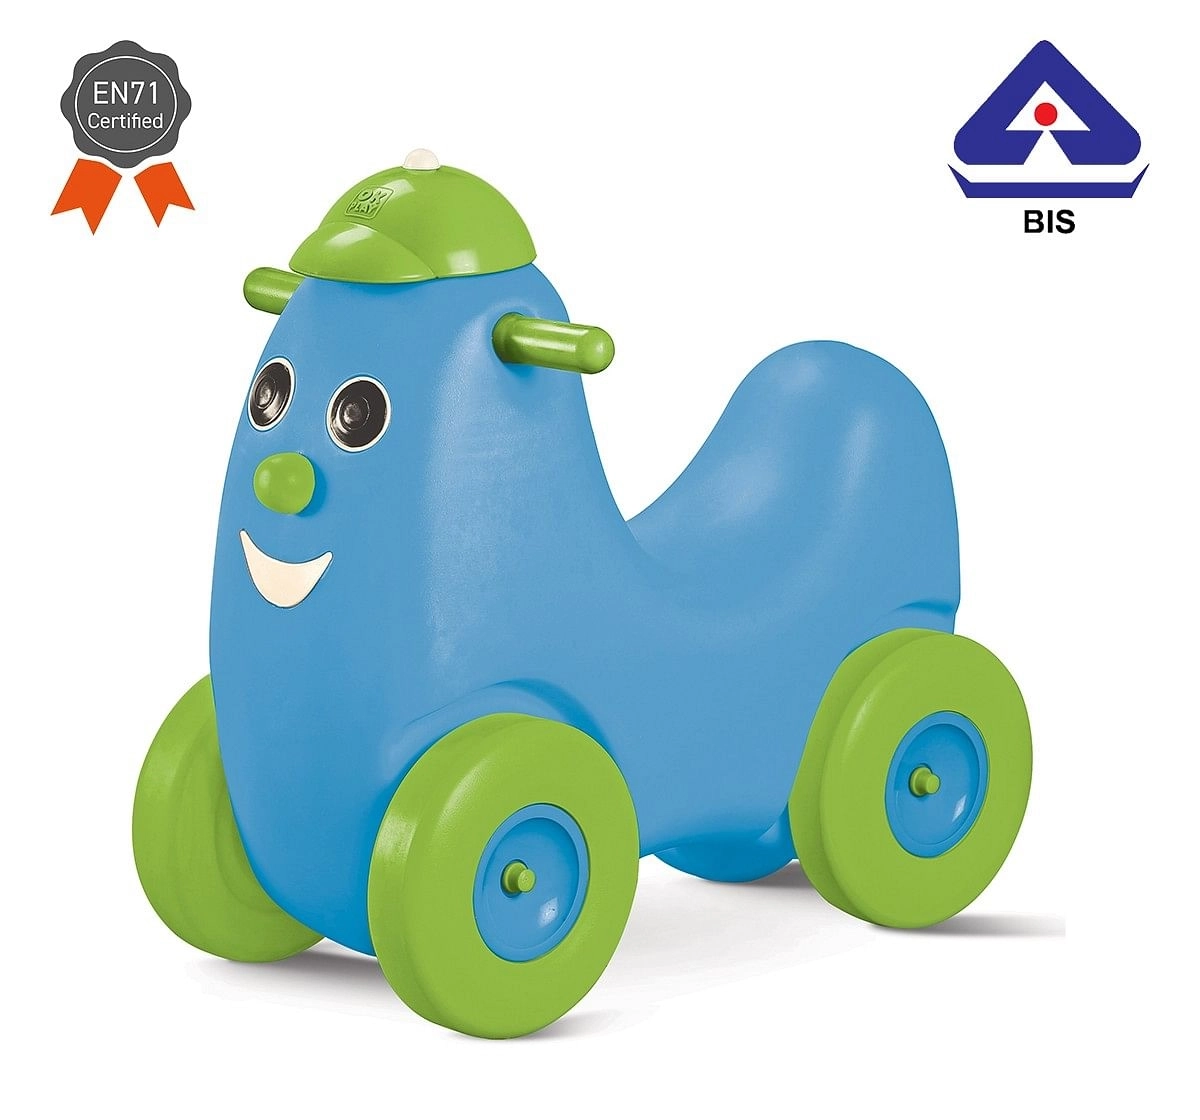 Ok Play Humpty Dumpty Push Rider with Curved Seat Ride On for Kids 3Y+, Blue 